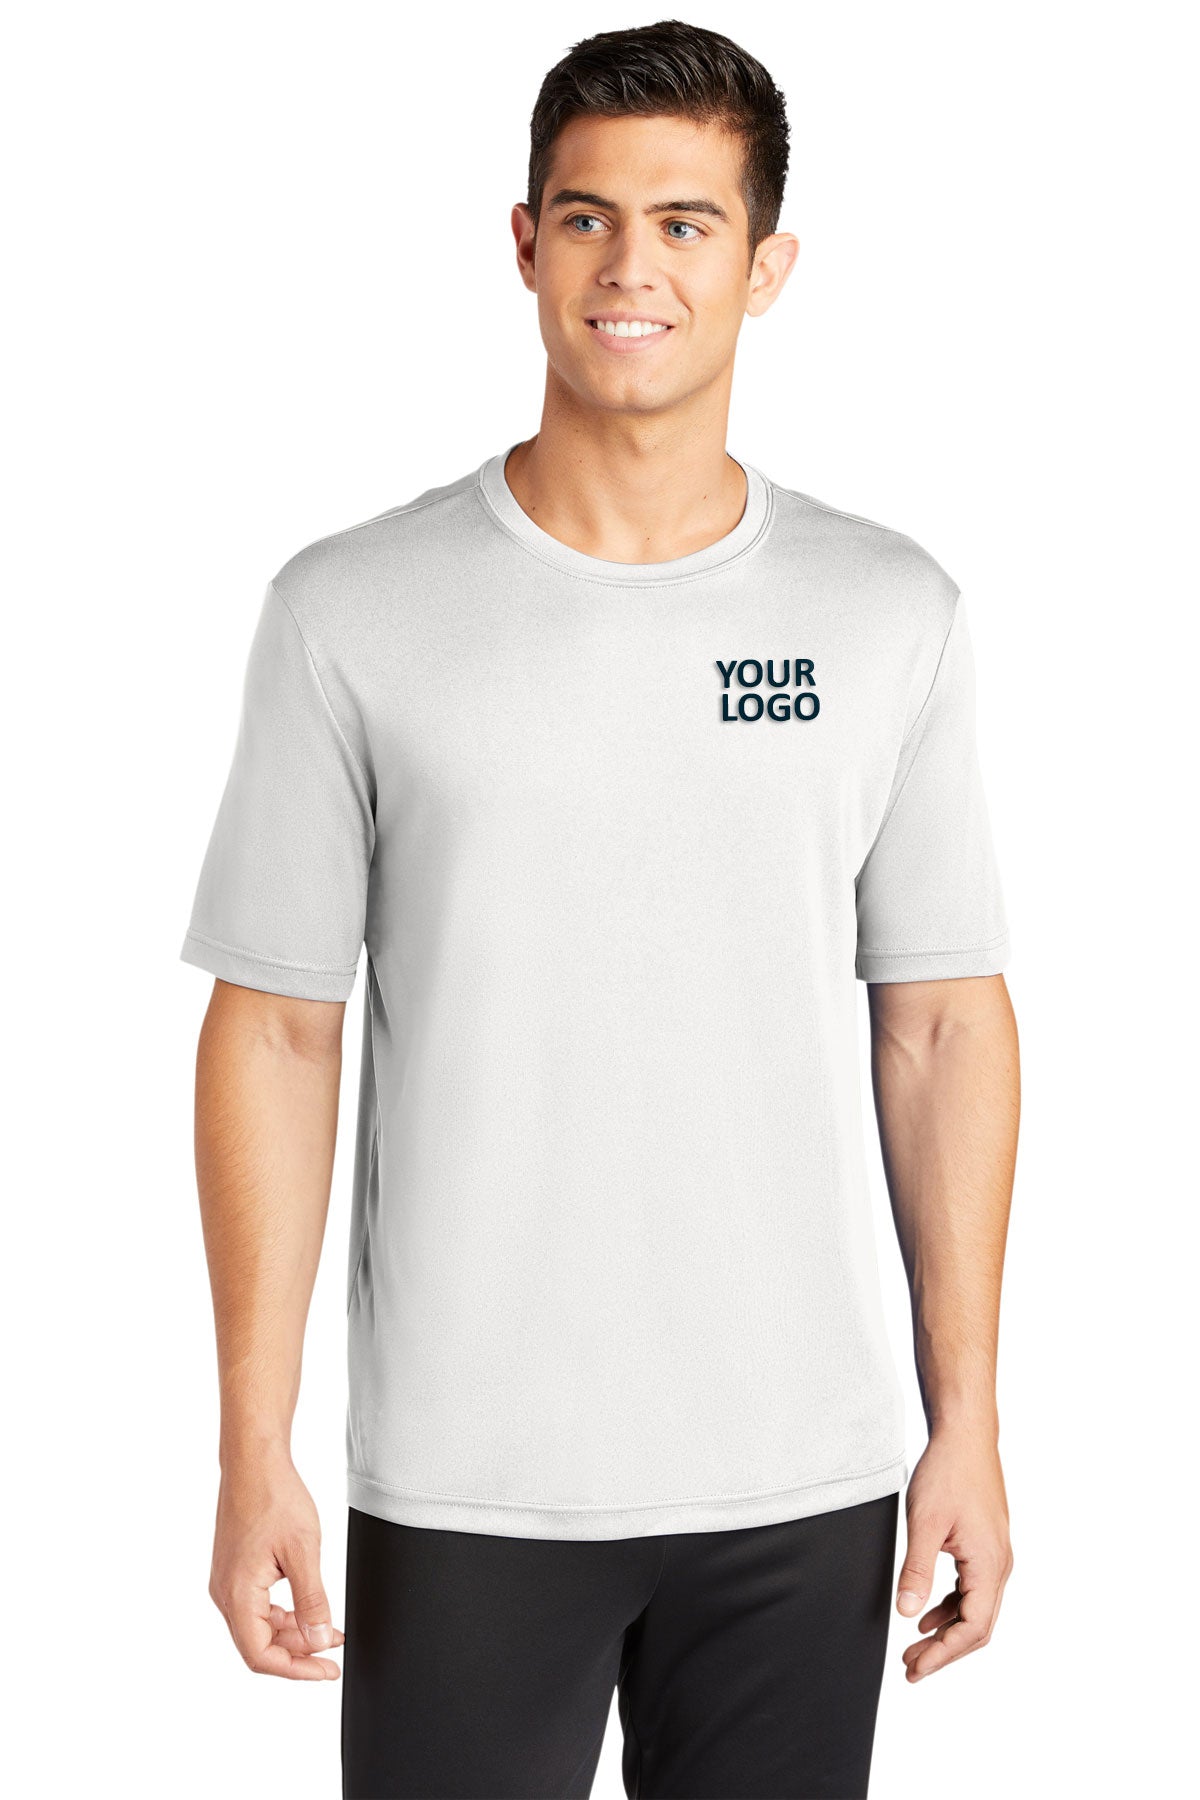 Sport-Tek Tall PosiCharge Branded Competitor Tee's, White